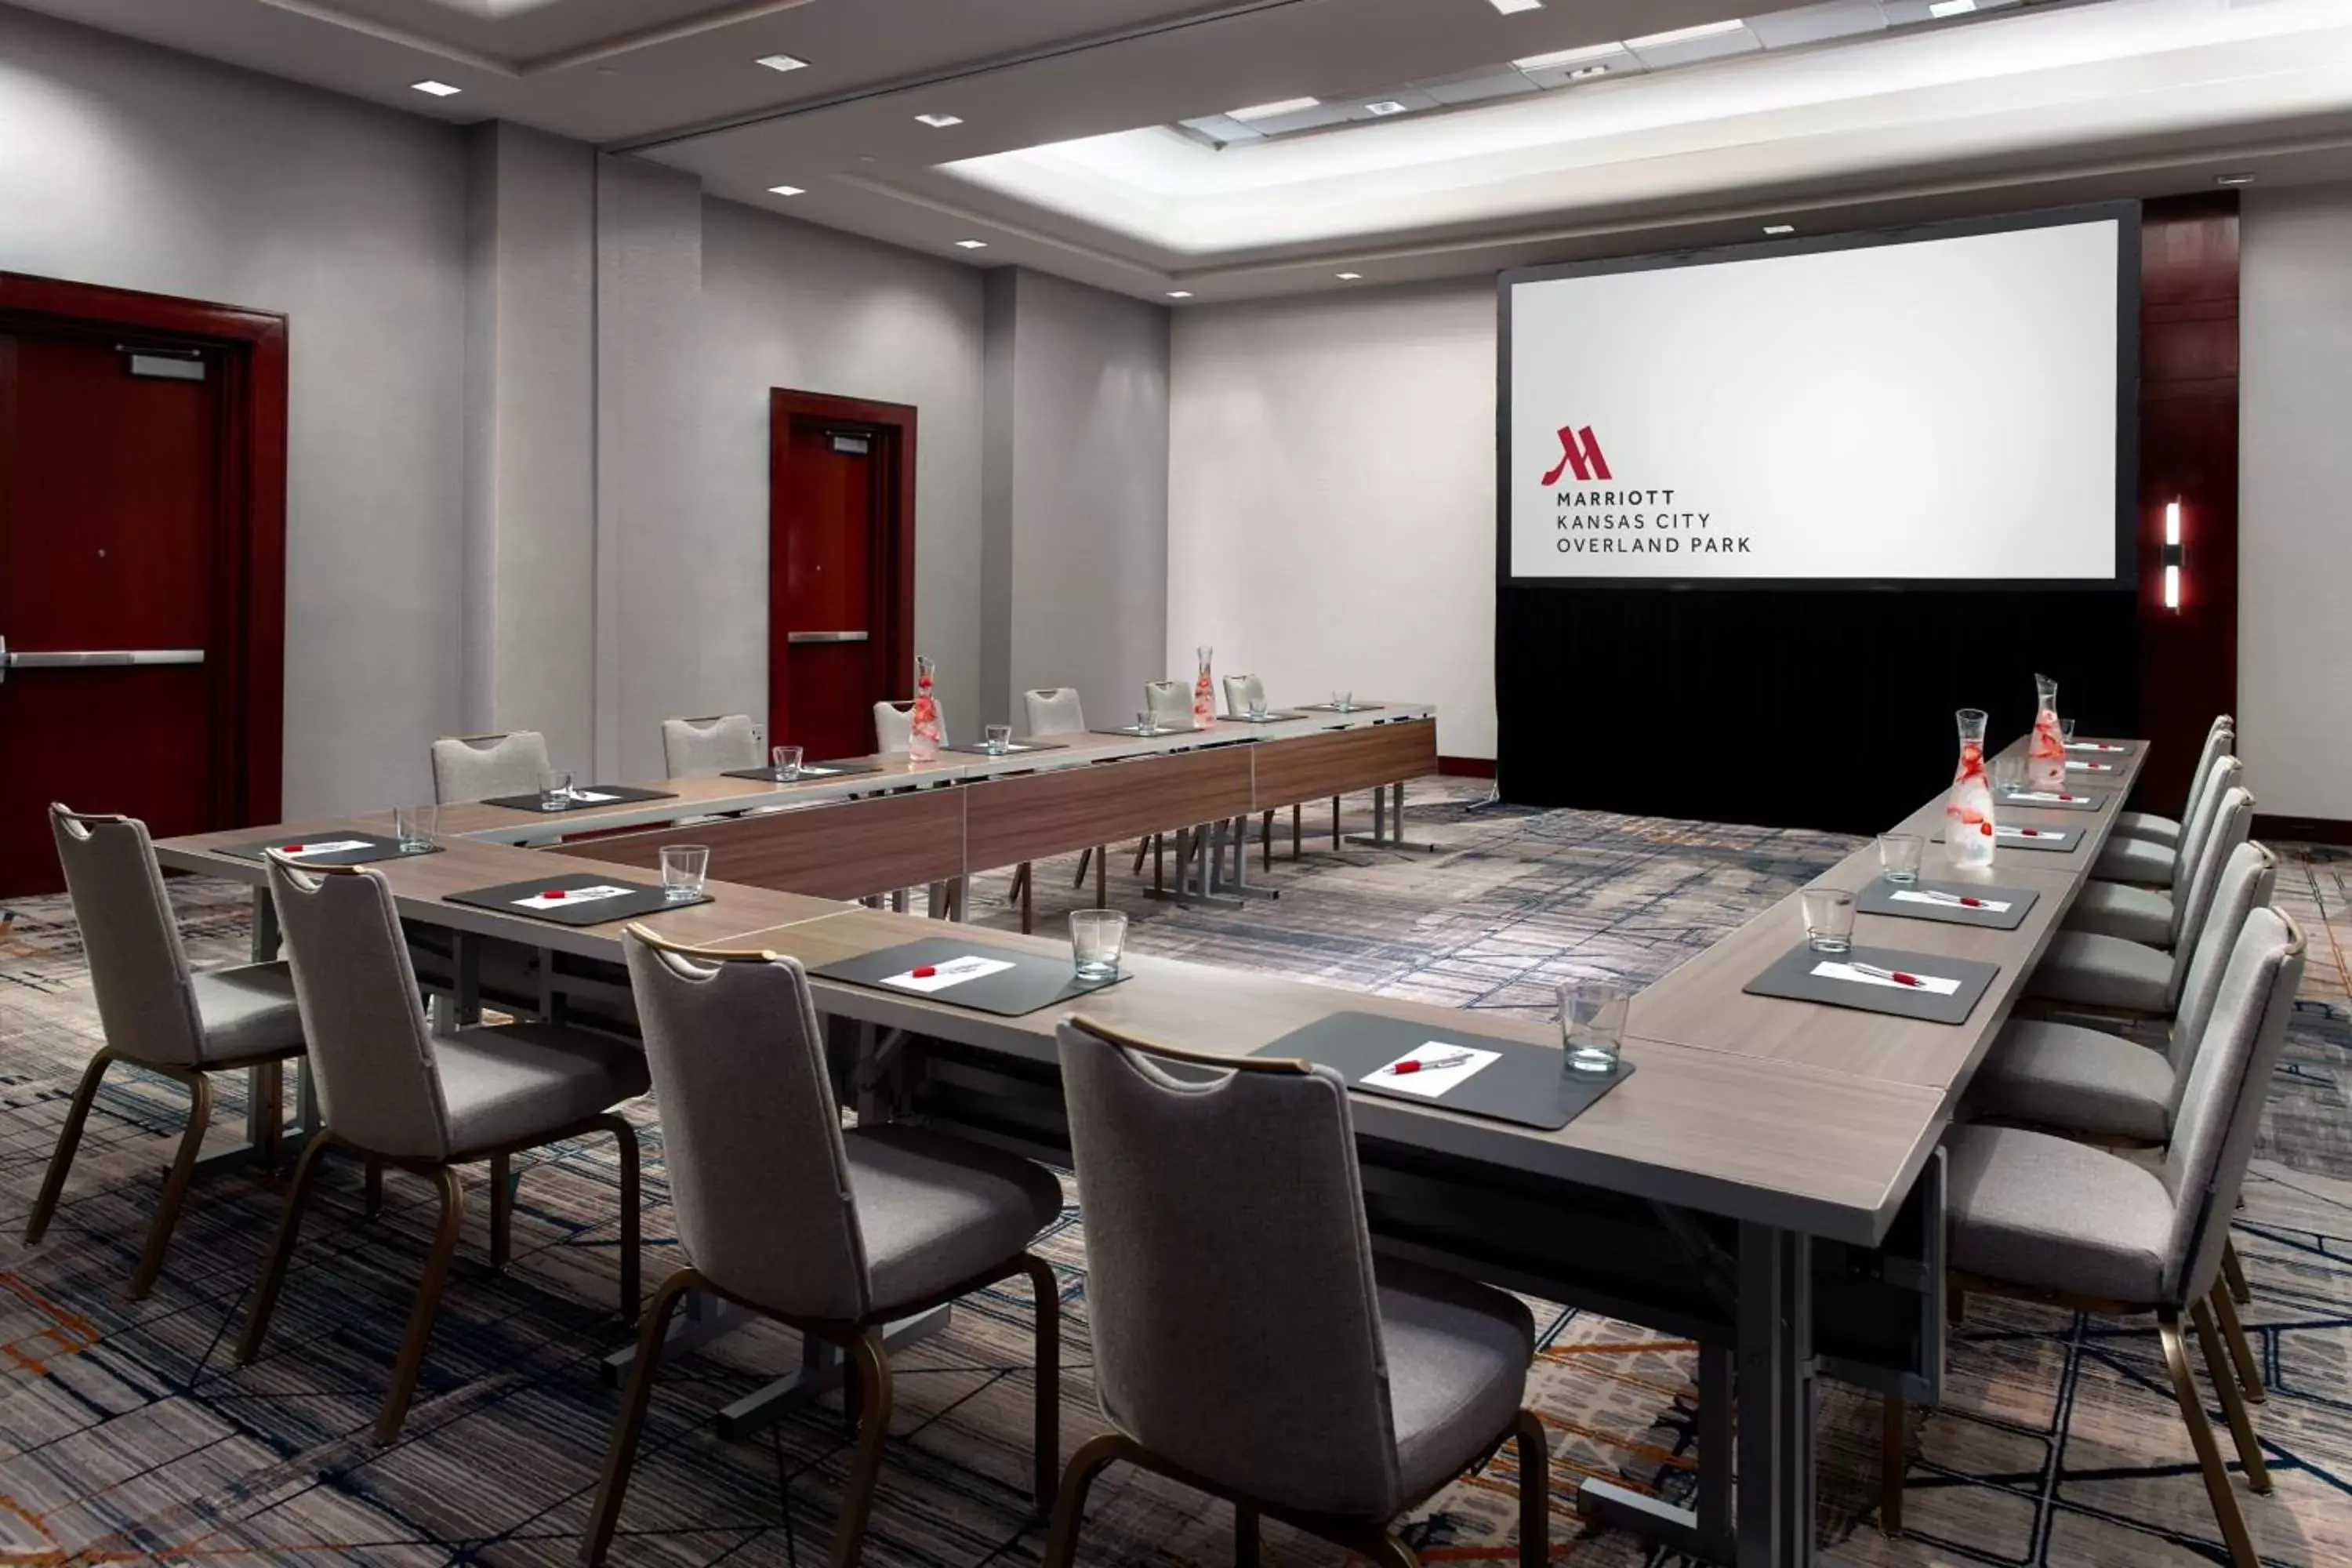 Meeting/conference room, Business Area/Conference Room in Marriott Kansas City Overland Park